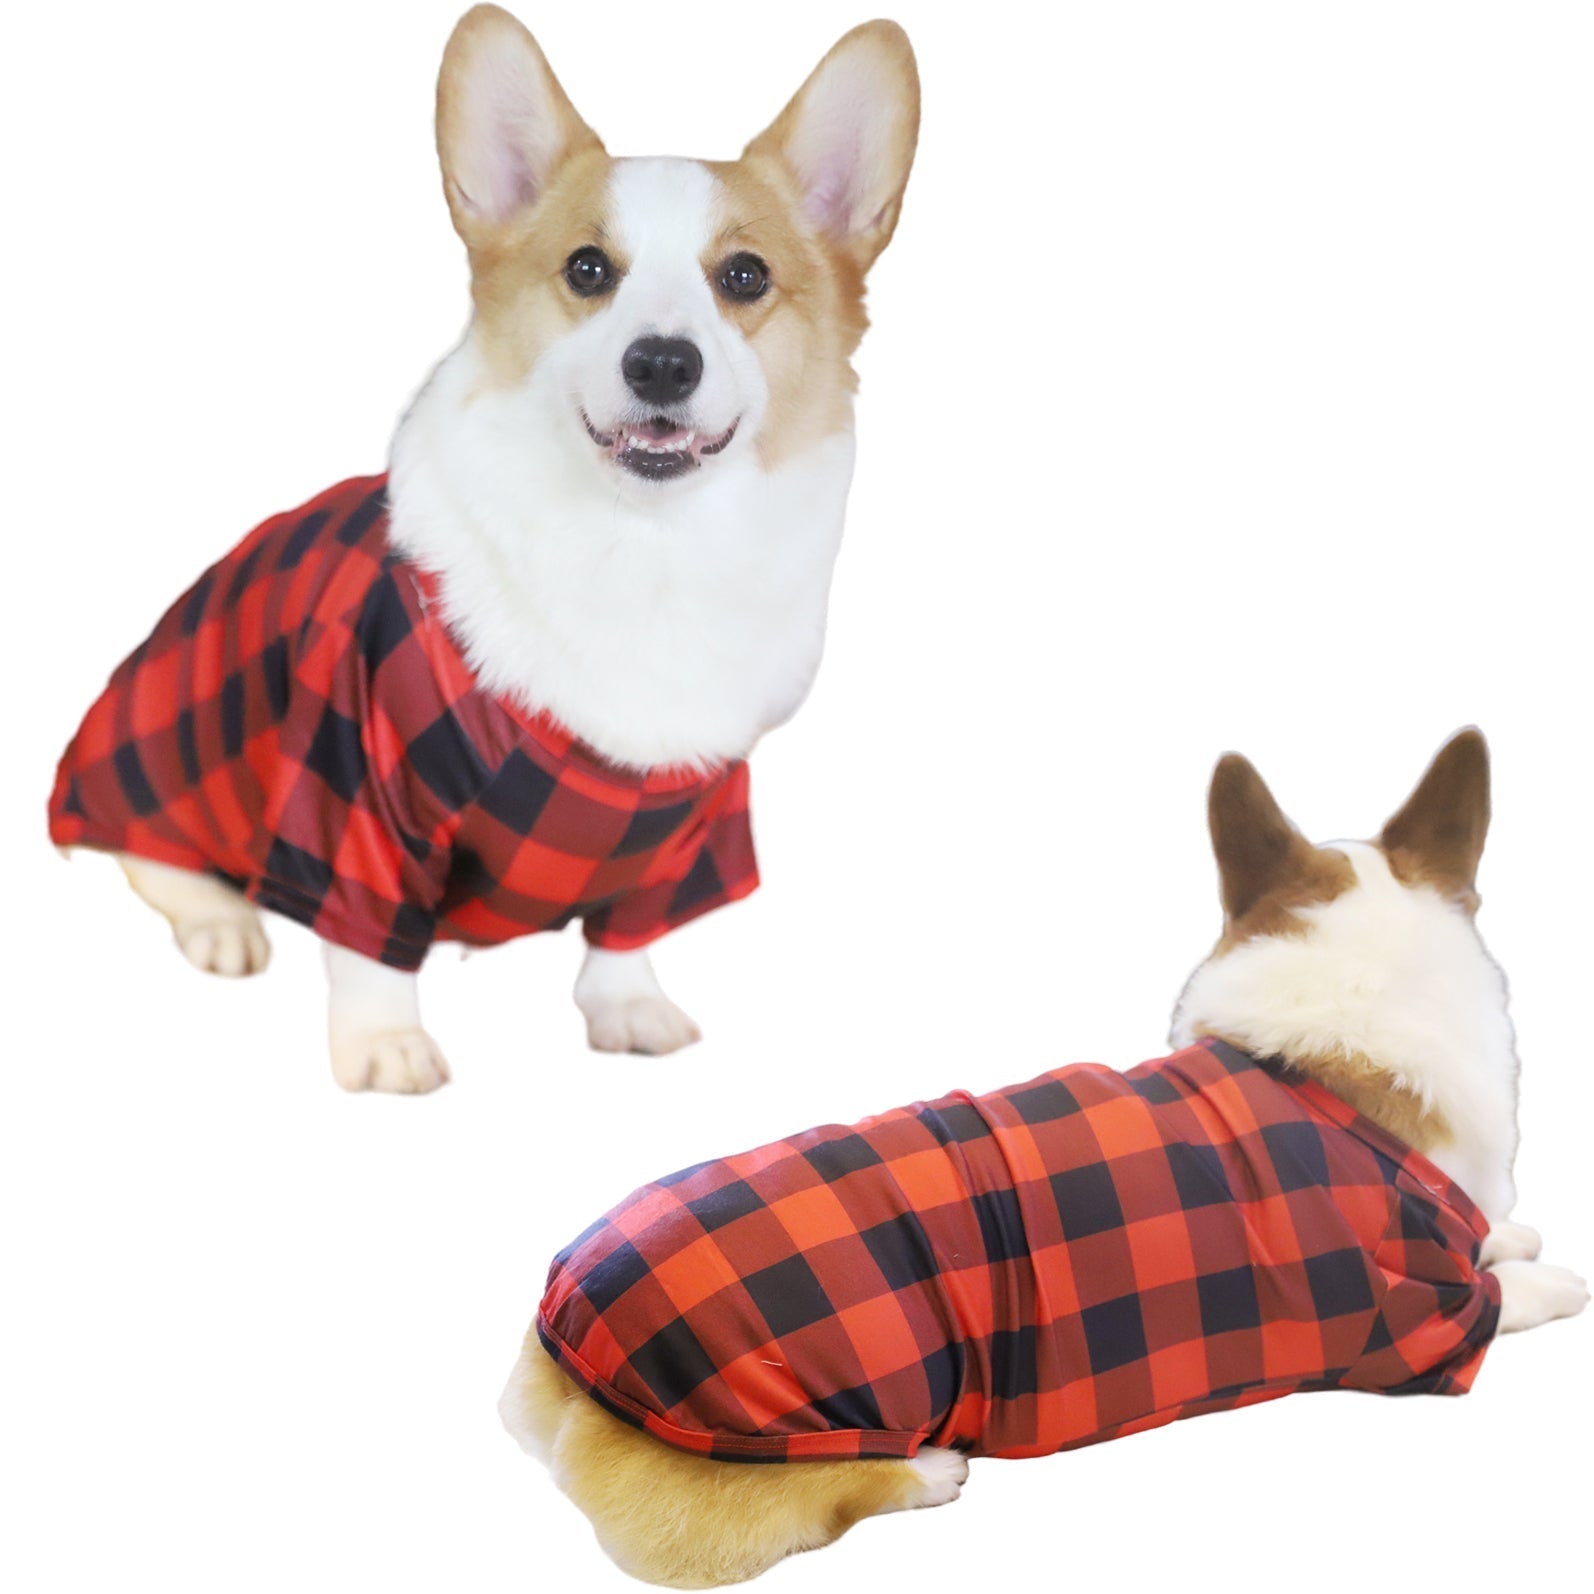 Christmas Dog Wearing Christmas Hat Patterned  Print Patterned Contrast Black top and Black & Red Plaid Pants Family Matching Pajamas Set